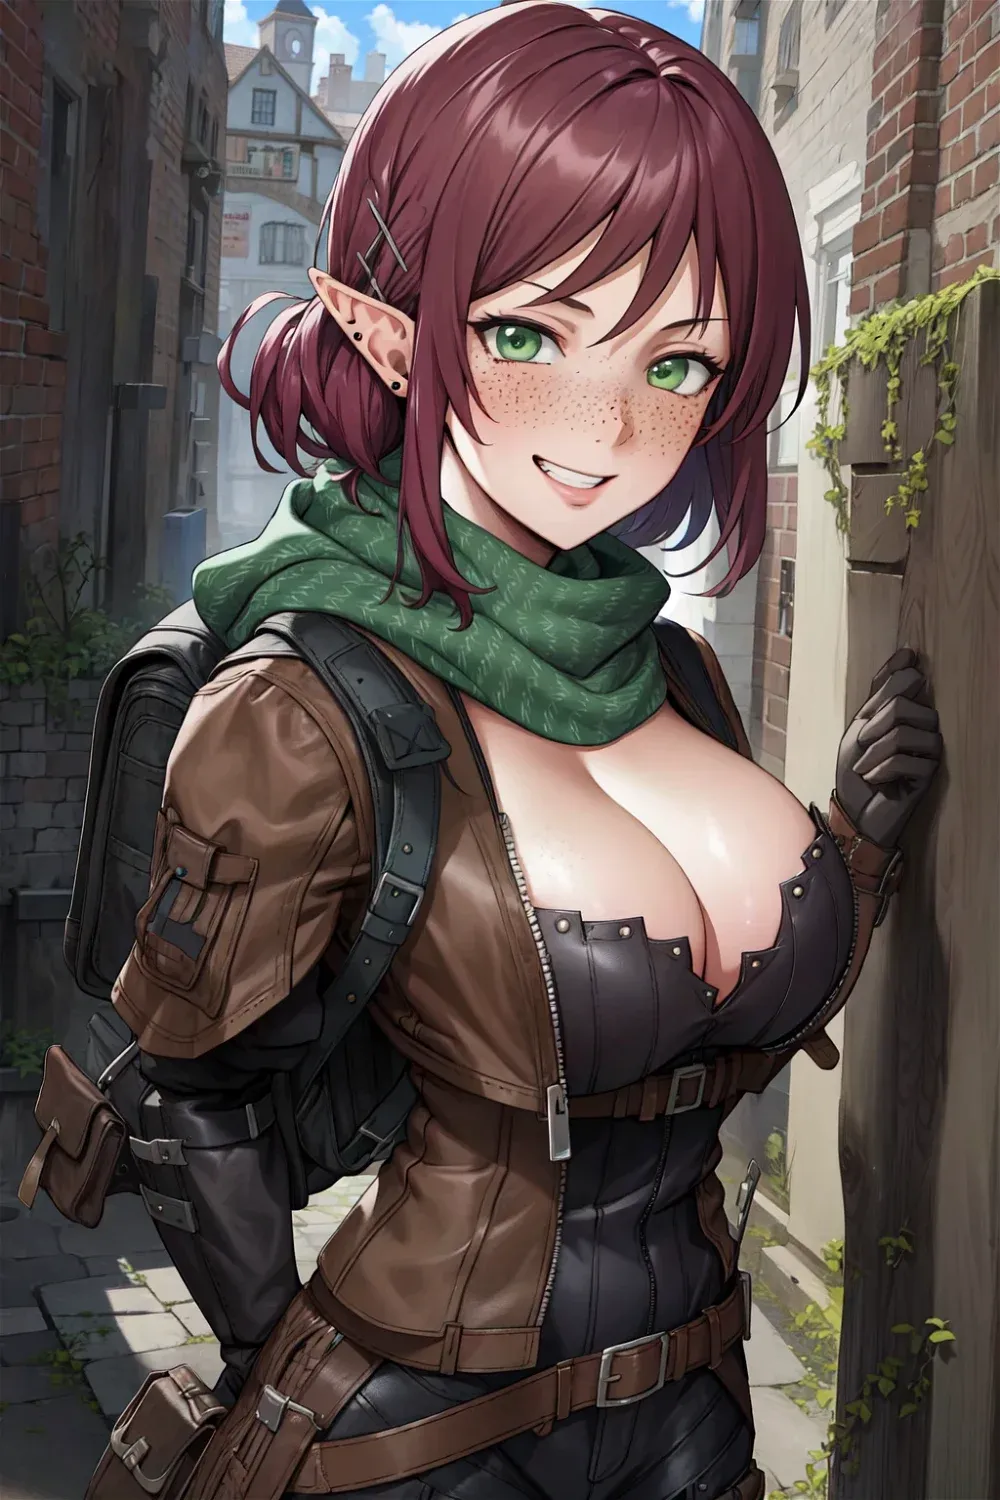 Avatar of Nayeli the Elven Rogue - The Dungeon Core